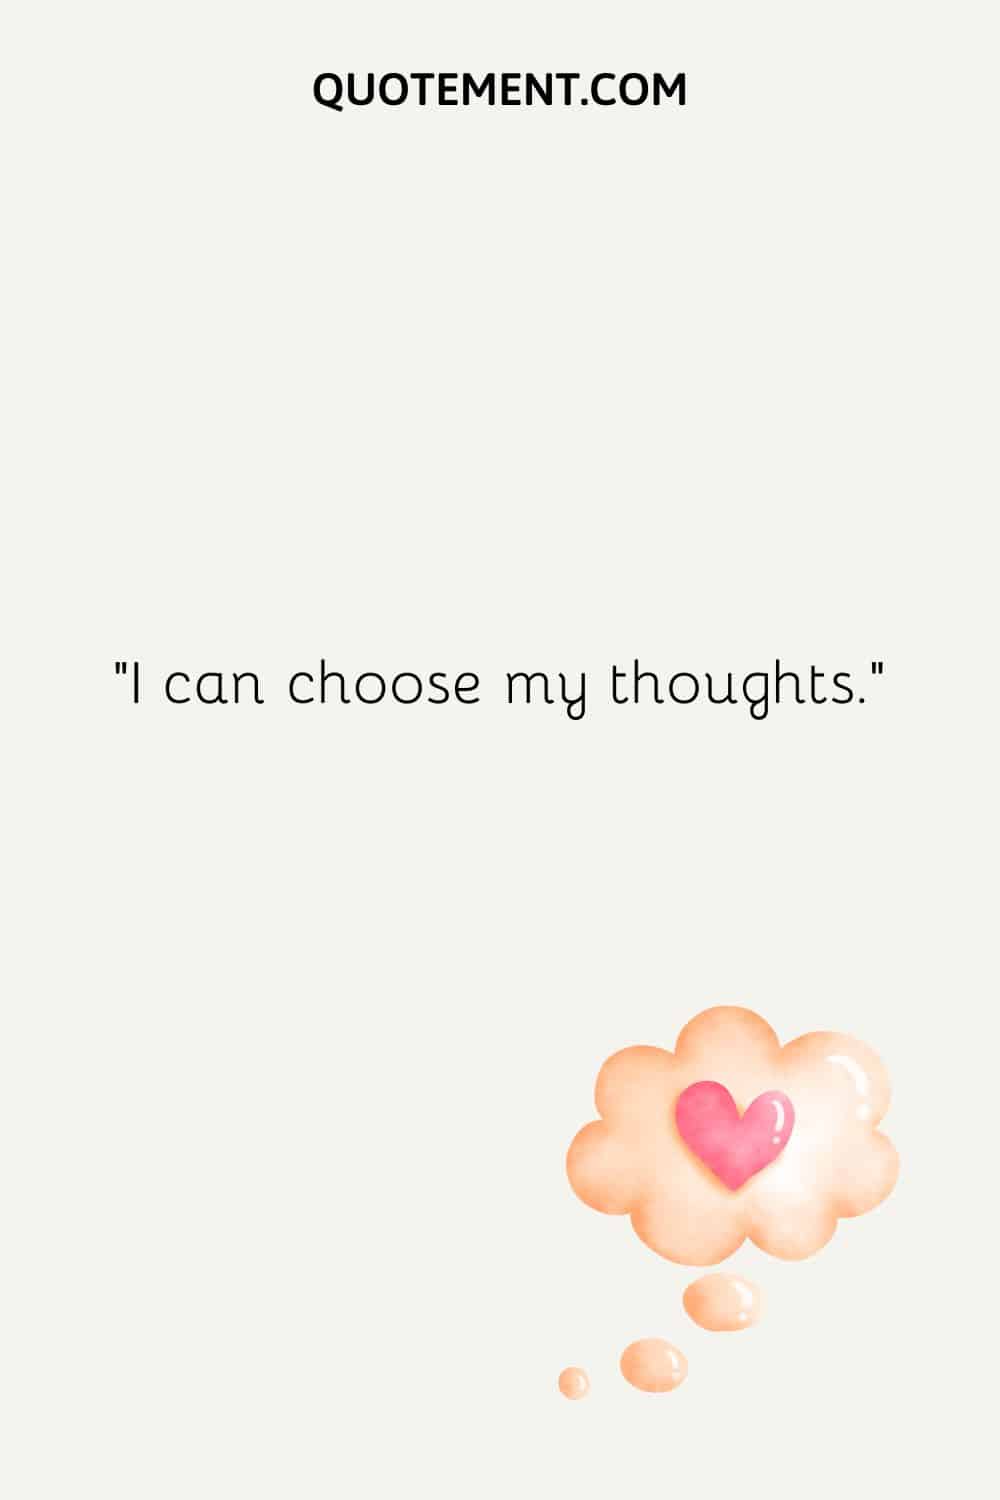 I can choose my thoughts